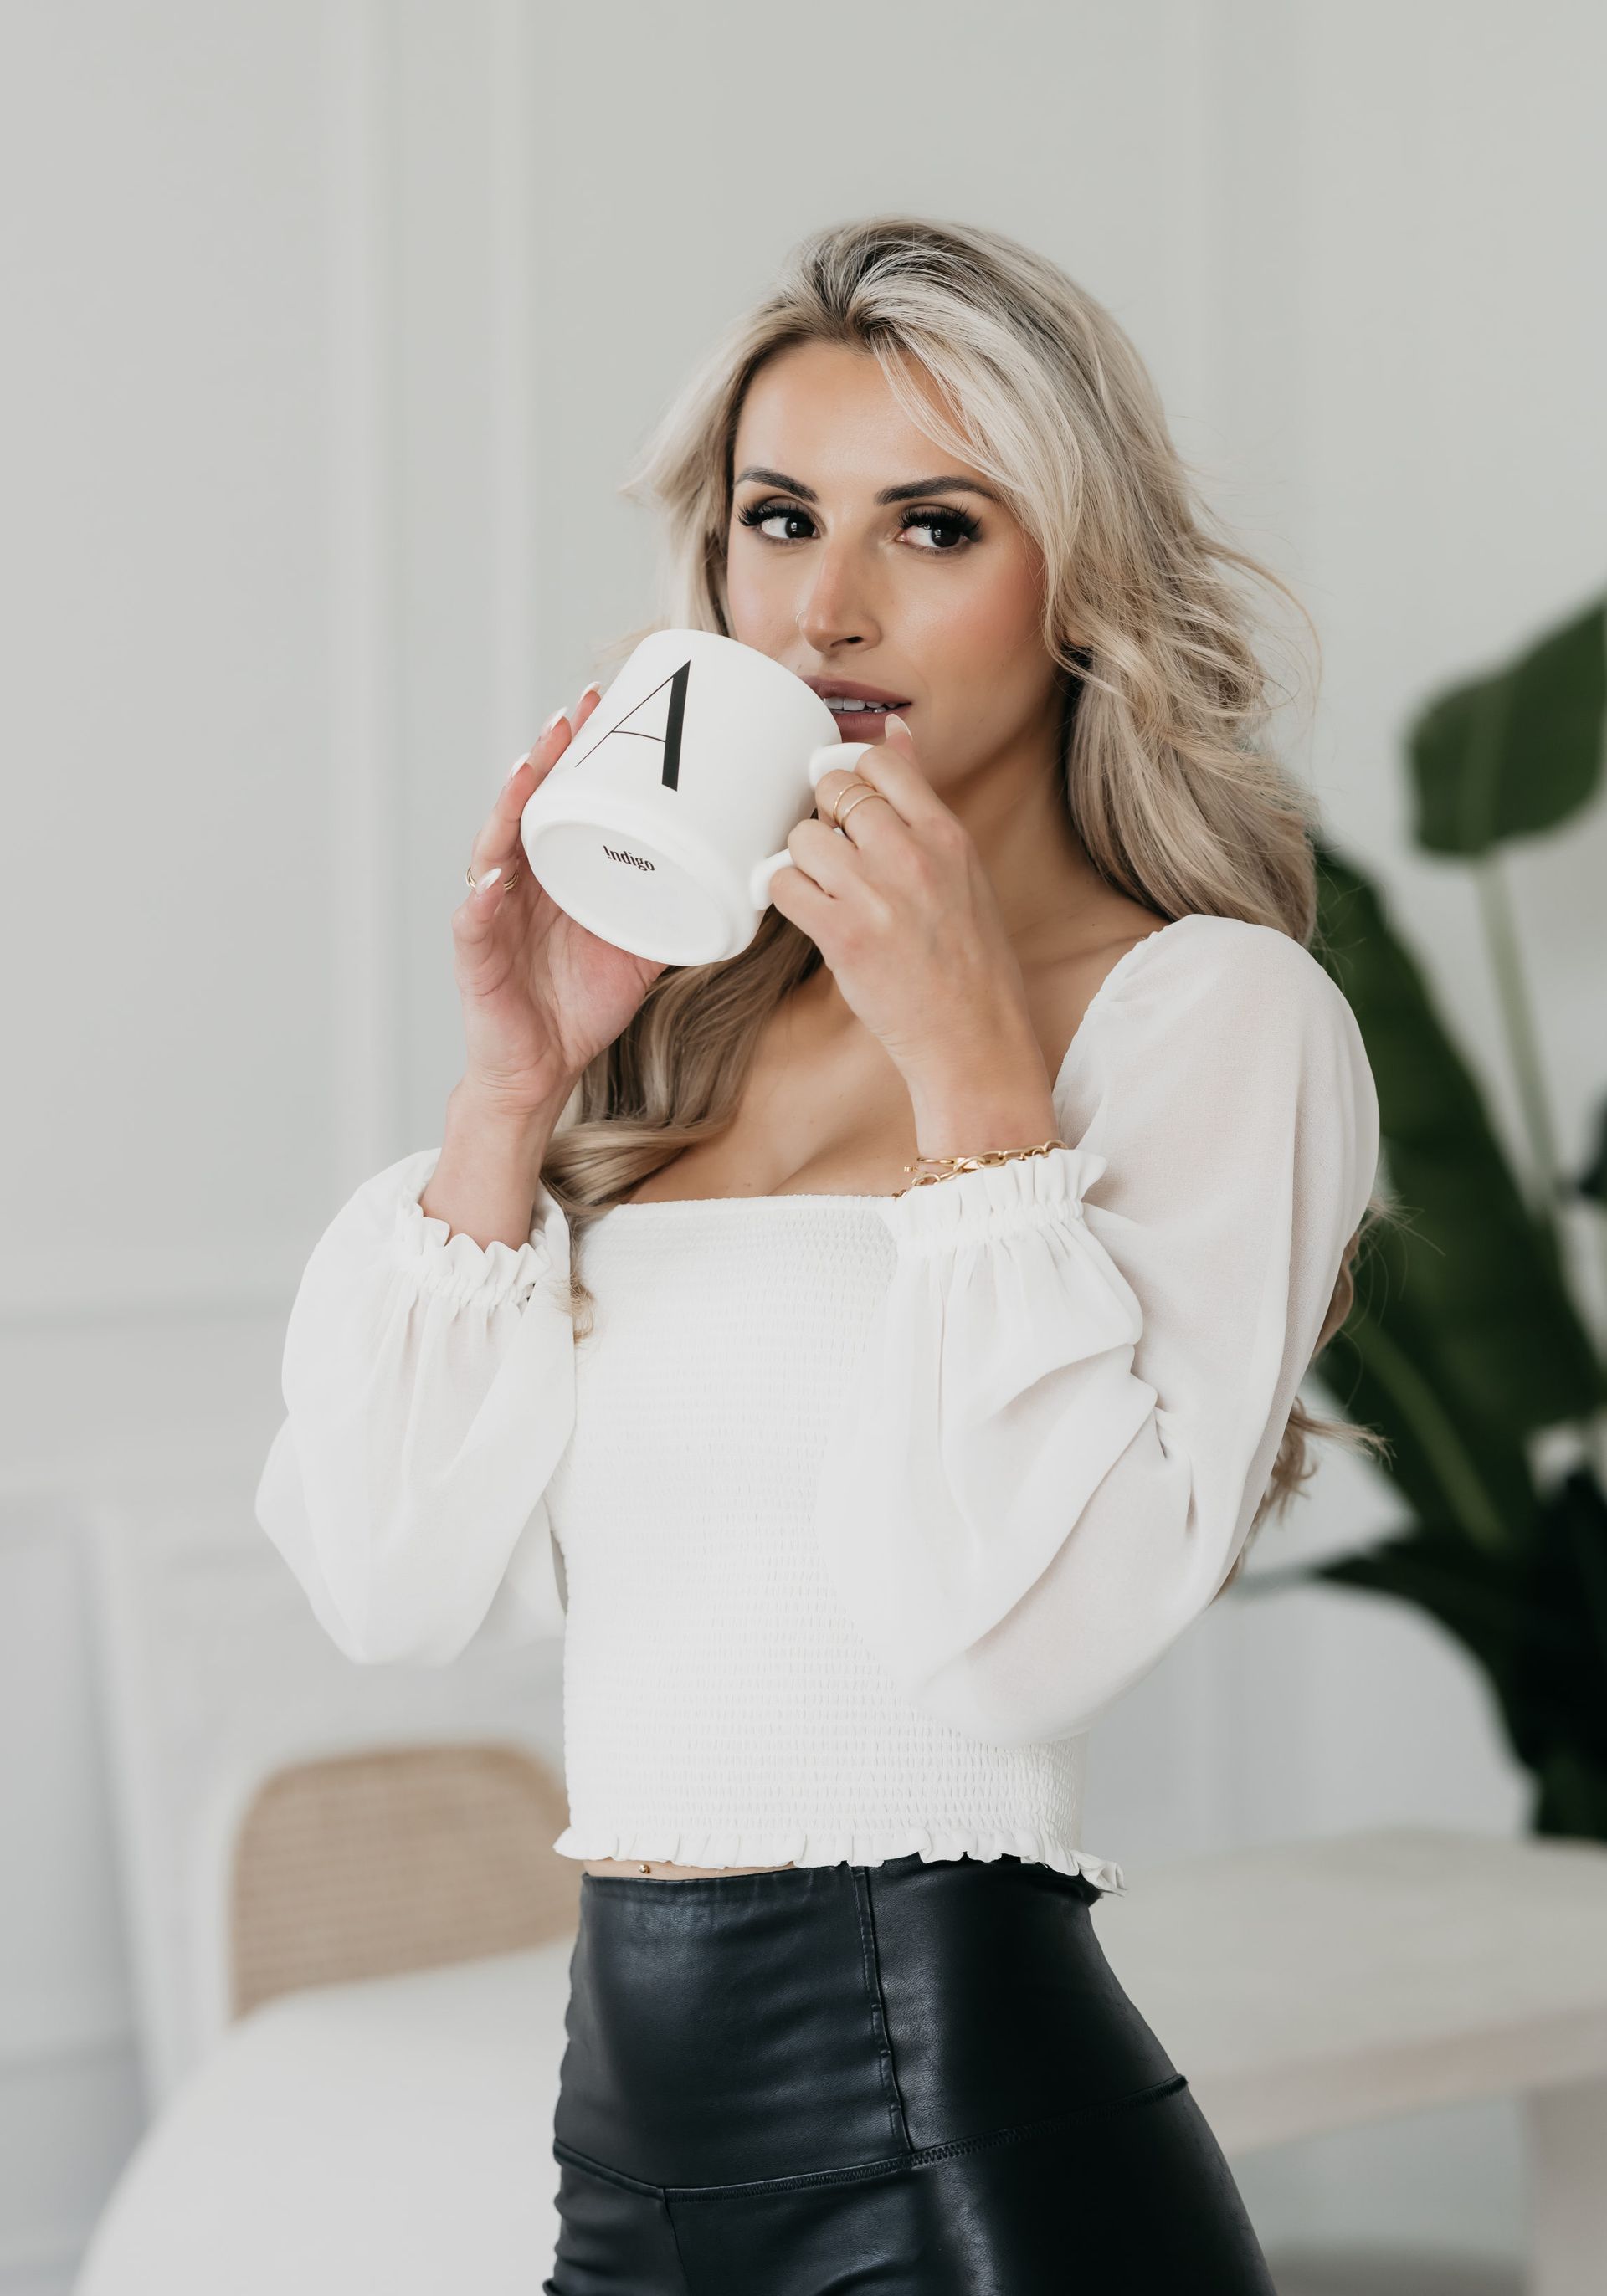 Woman in black leather skirt and white blouse poised to sip from a large coffee mug, with a focused gaze directed off to the side in a personal branding photography setting.